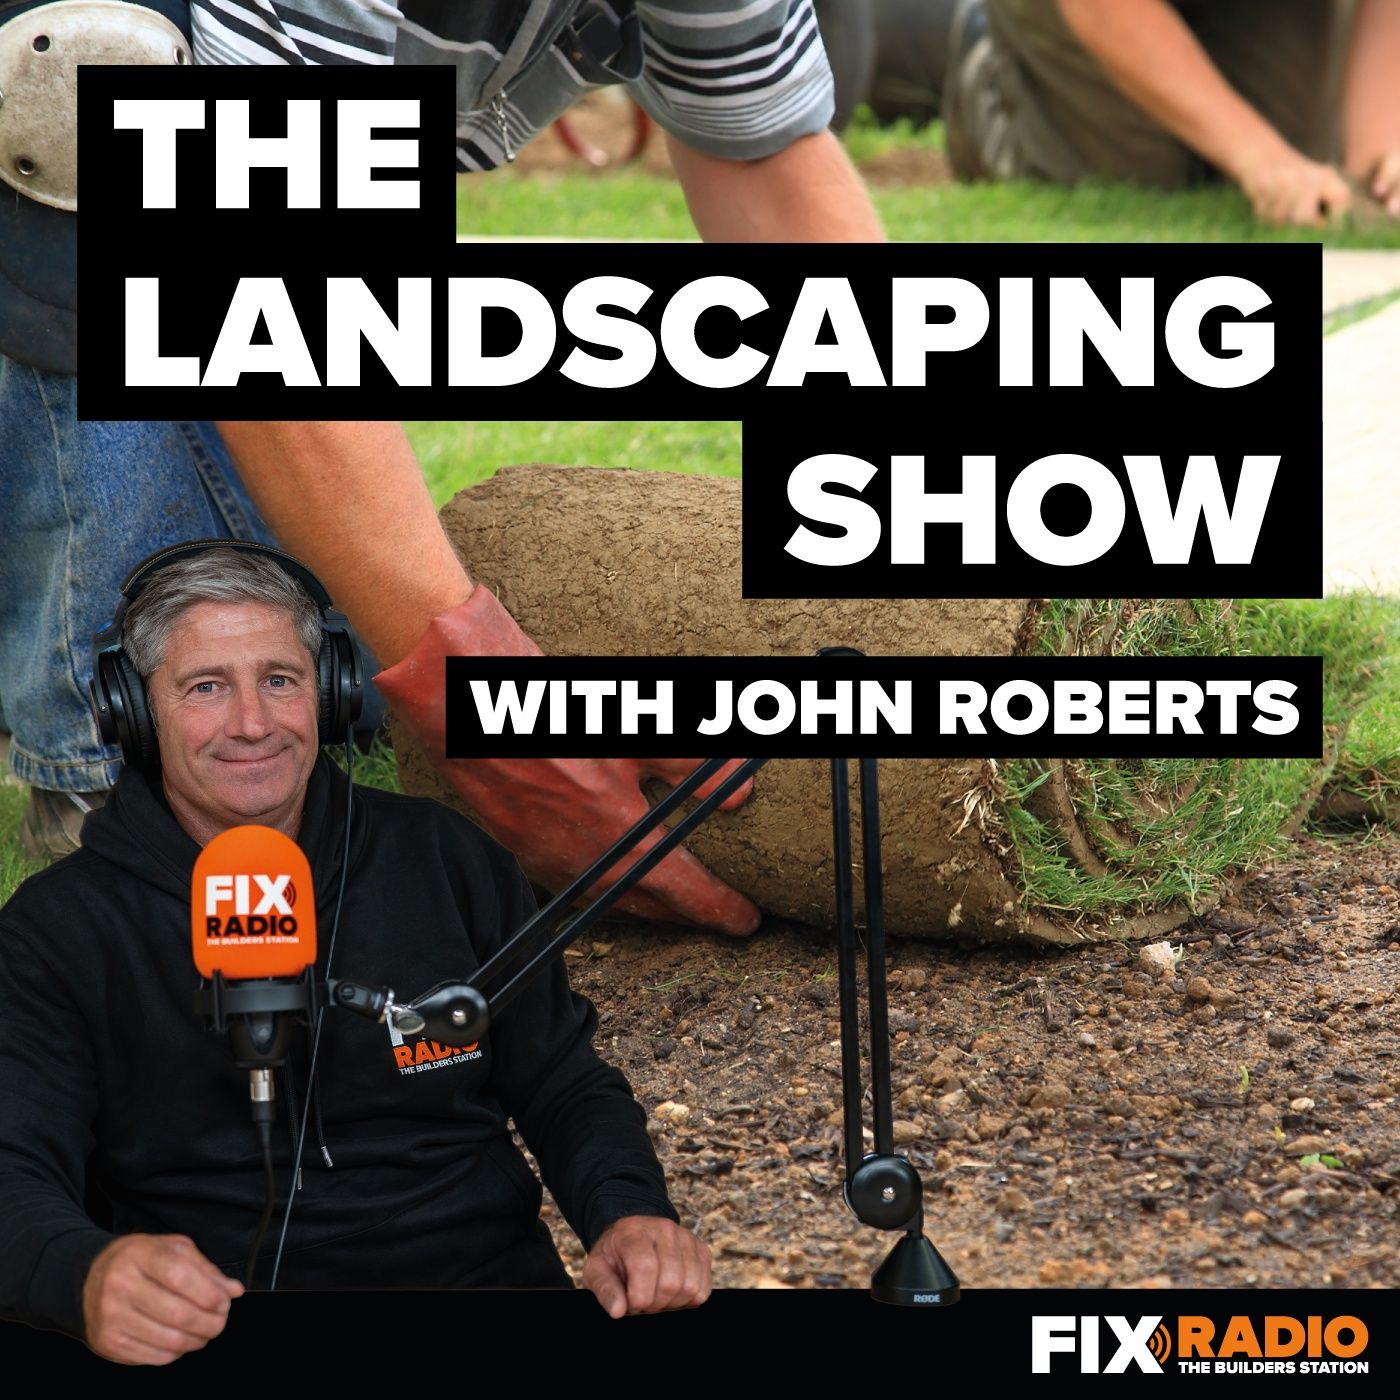 The Landscaping Show